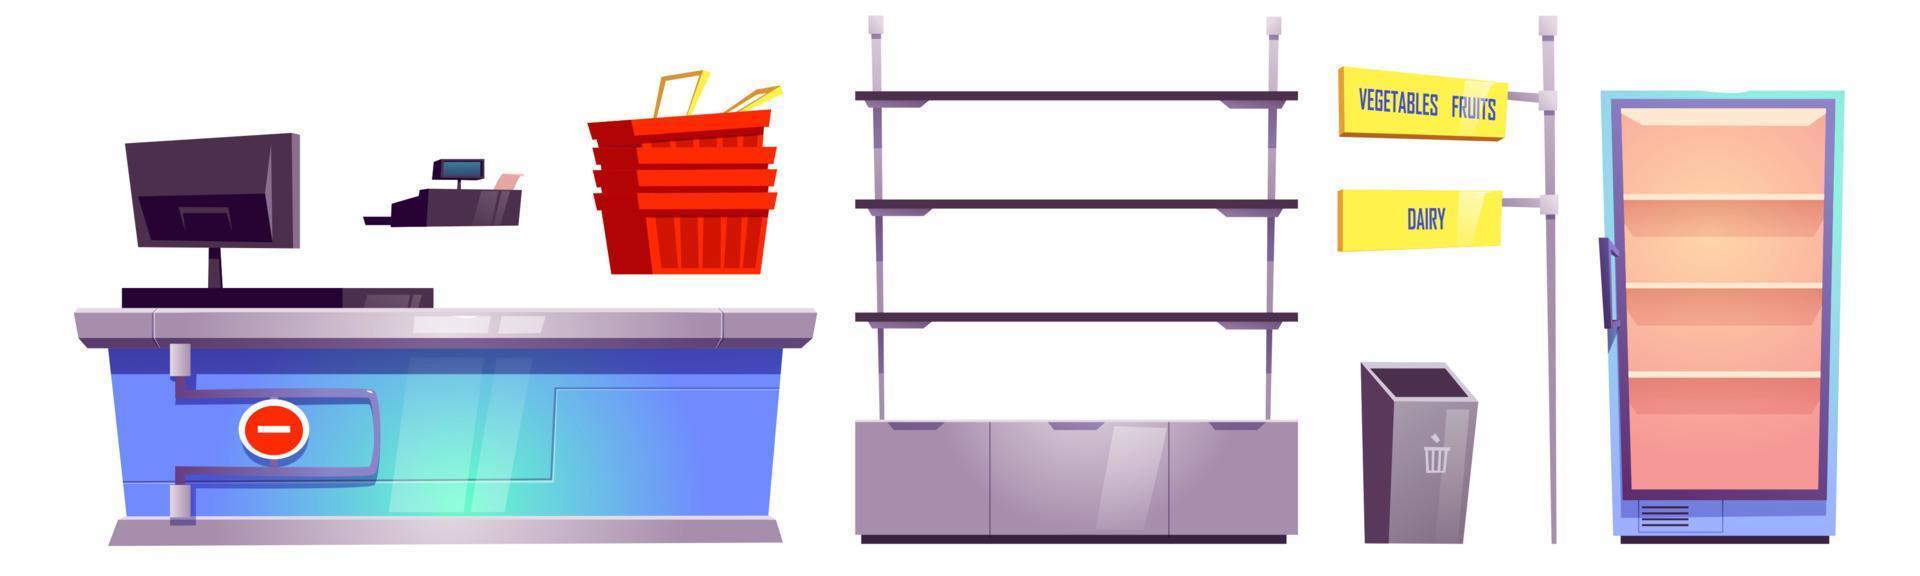 Supermarket store with checkout counter, shelves vector